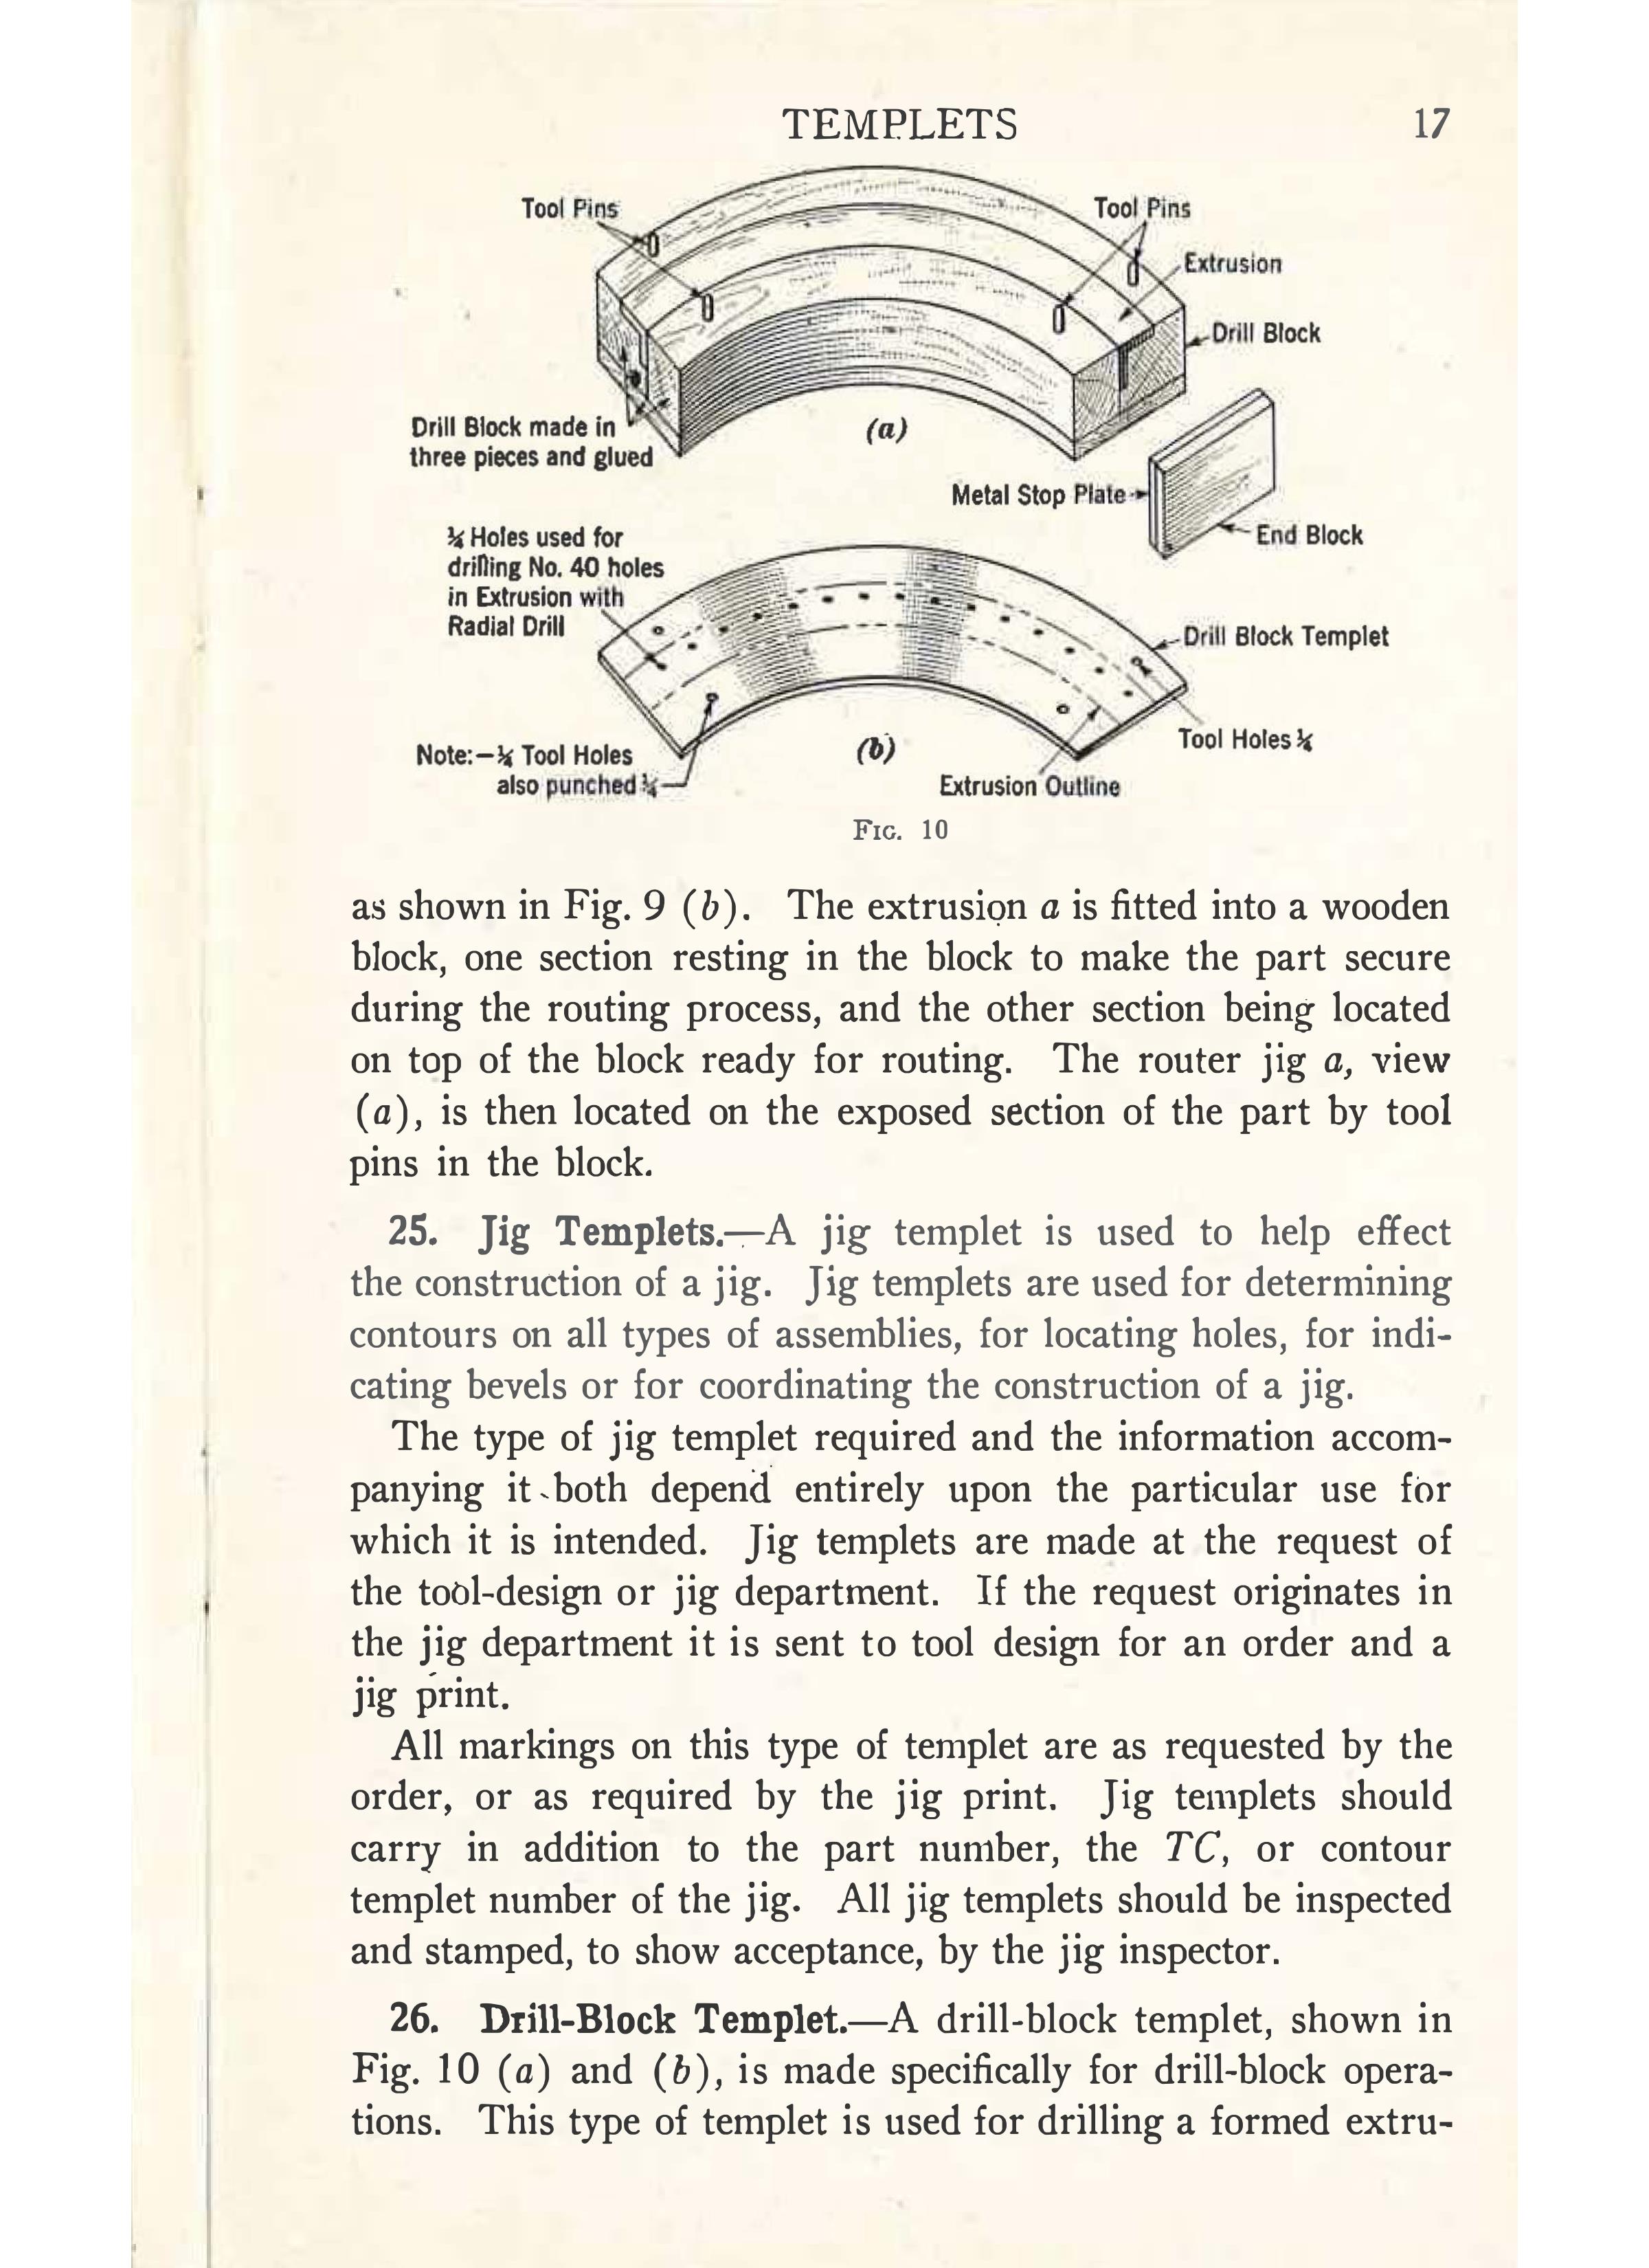 Sample page 19 from AirCorps Library document: Aircraft Tooling - Templets - Bureau of Aeronautics